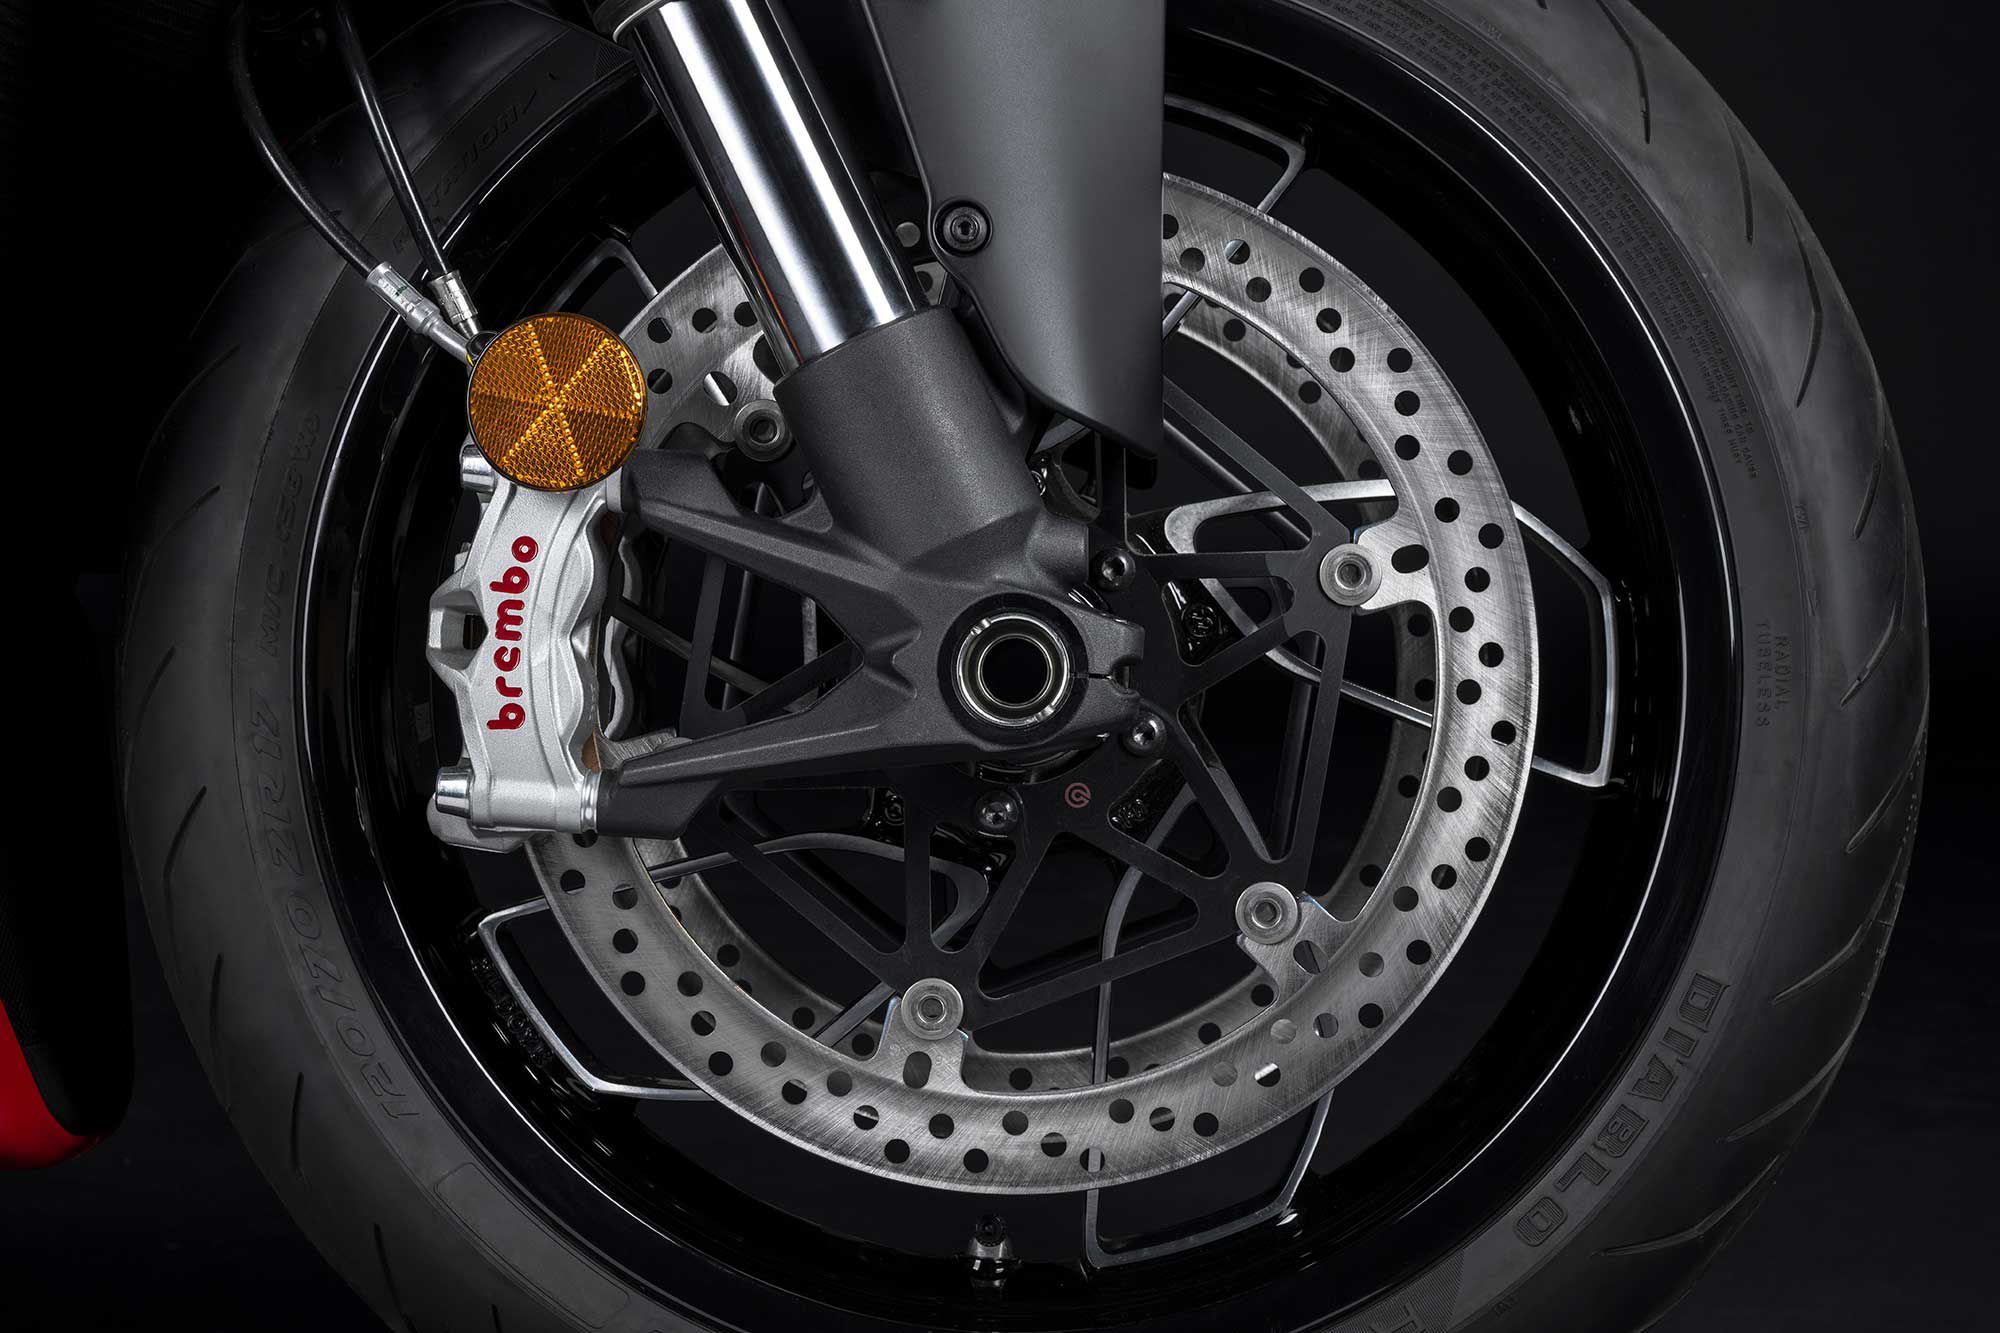 Brembo Stylema four-piston radial calipers are intended to offer all the stopping power needed to get the Diavel V4 slowed down.